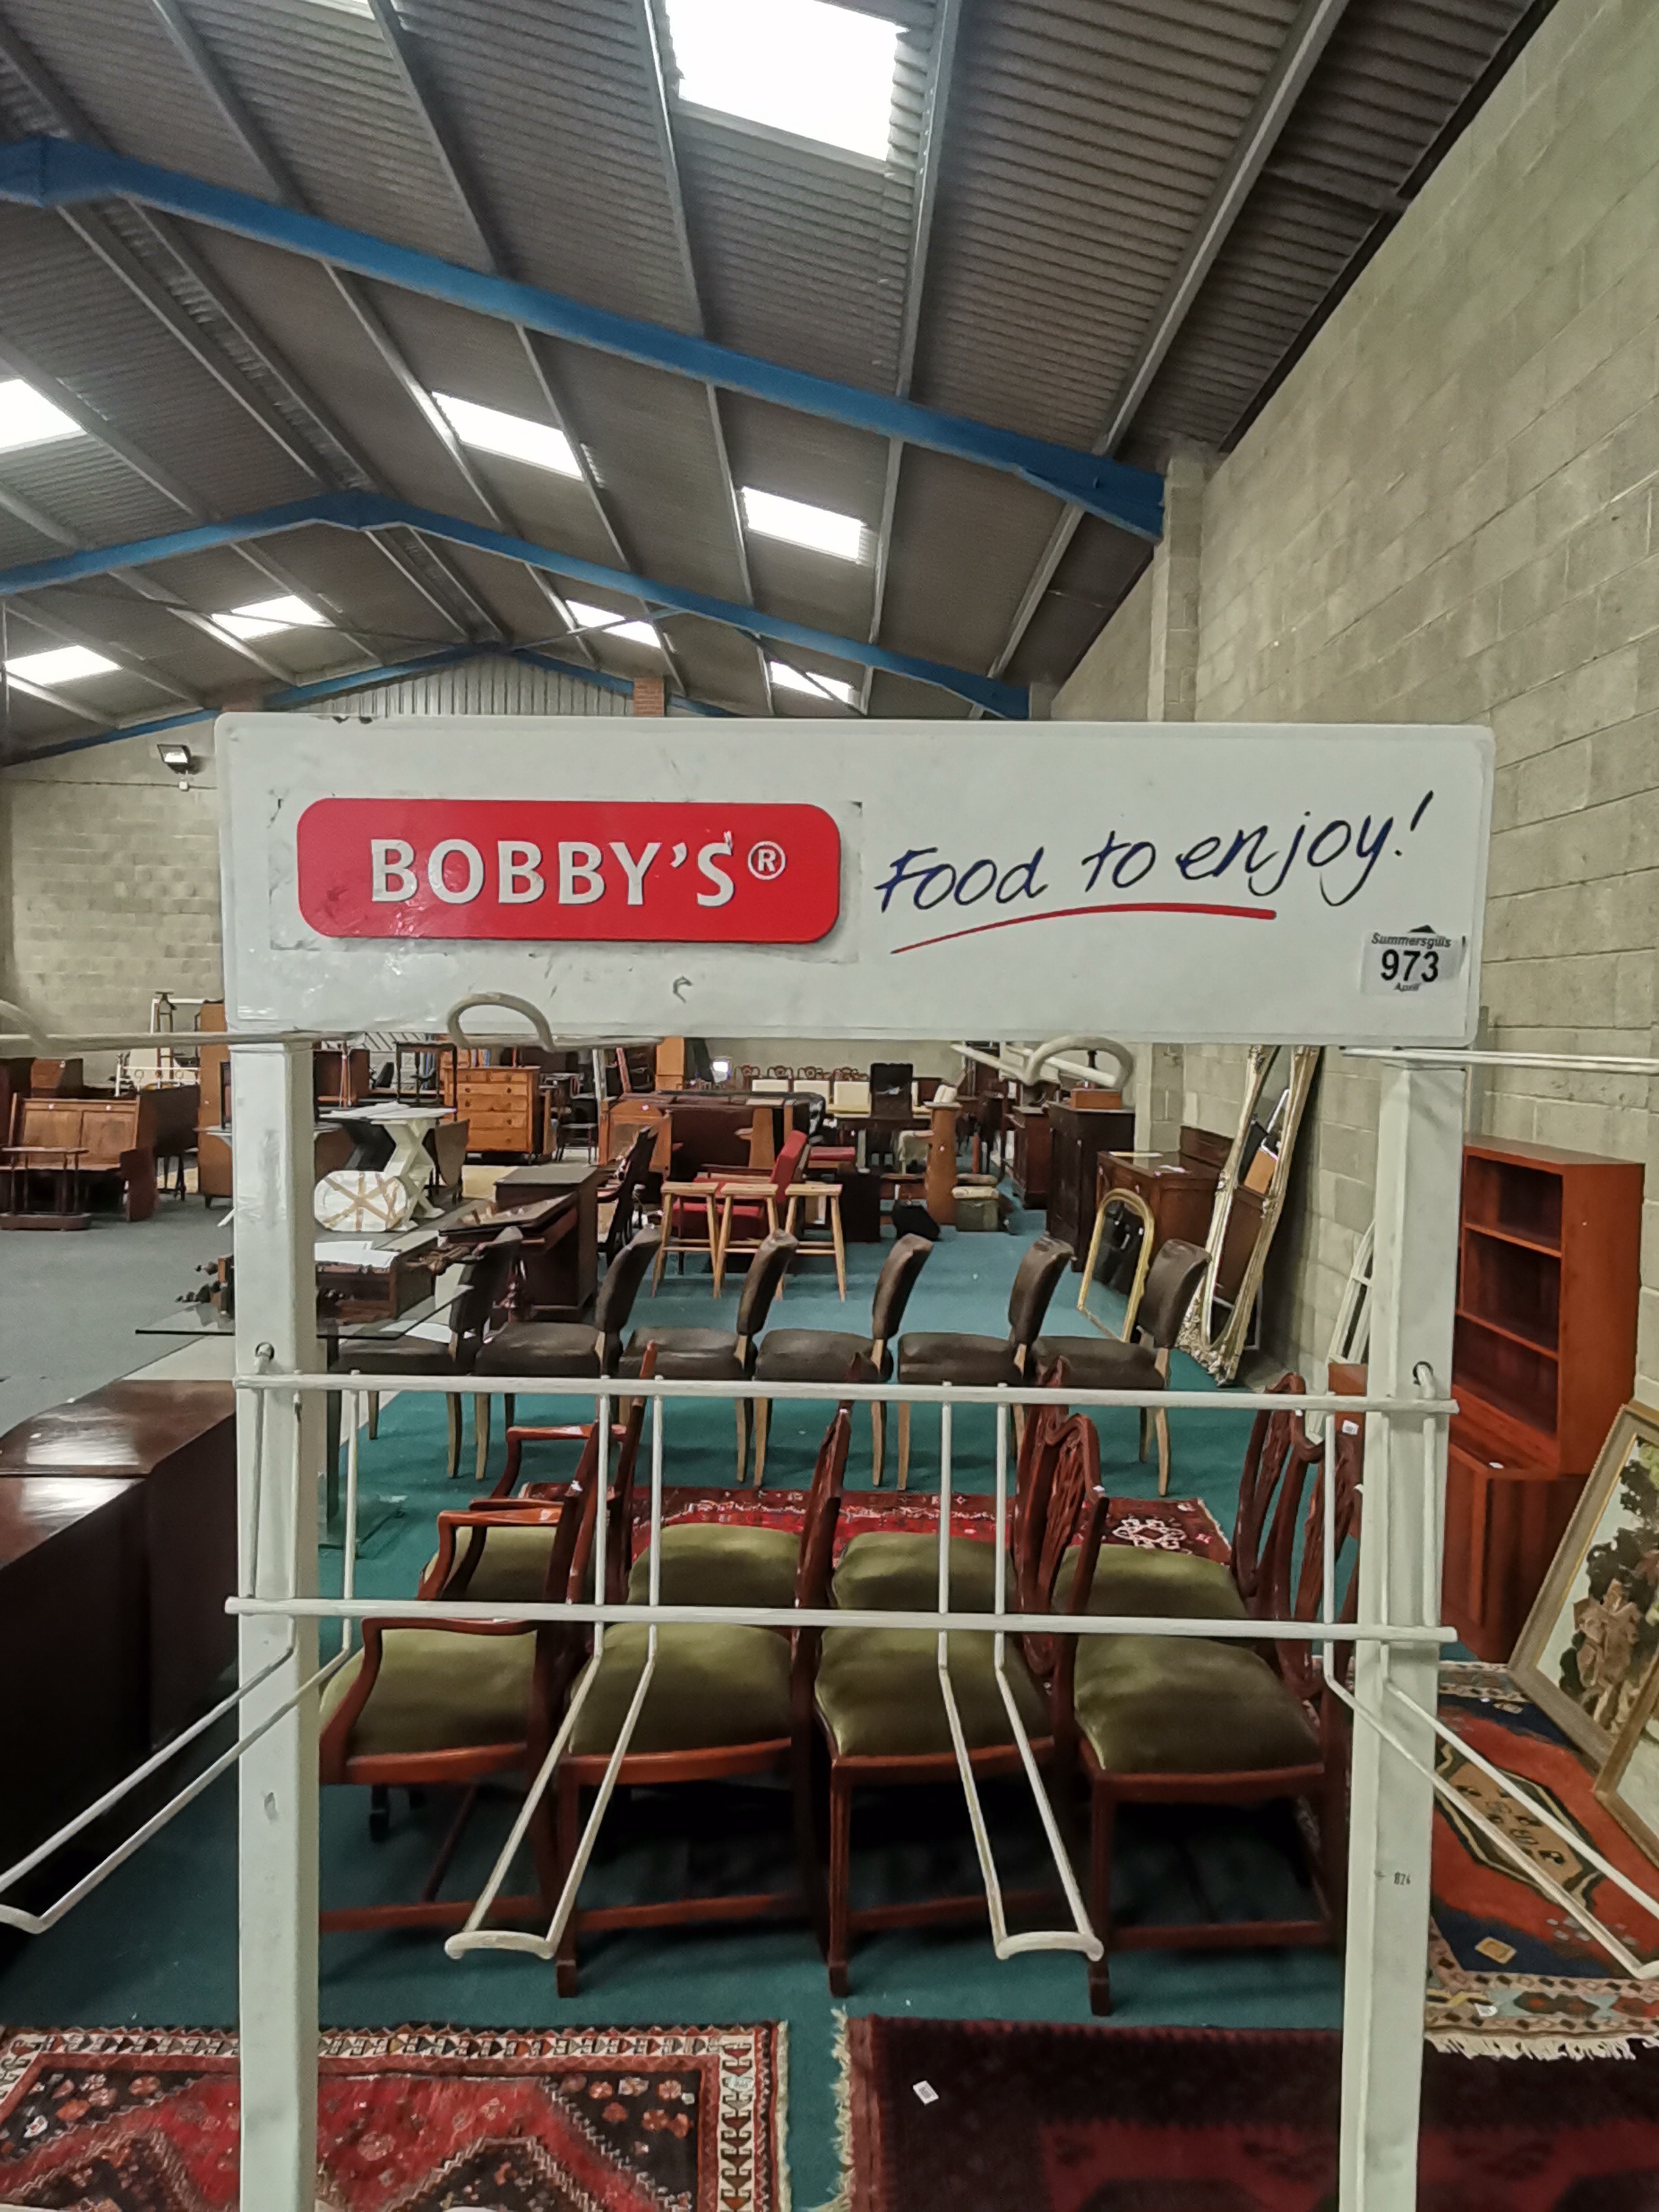 Retro "Bobby's Food to enjoy!" shop display stand 155cm height 56cm wide, 2 x bentwood chairs and a - Image 2 of 3